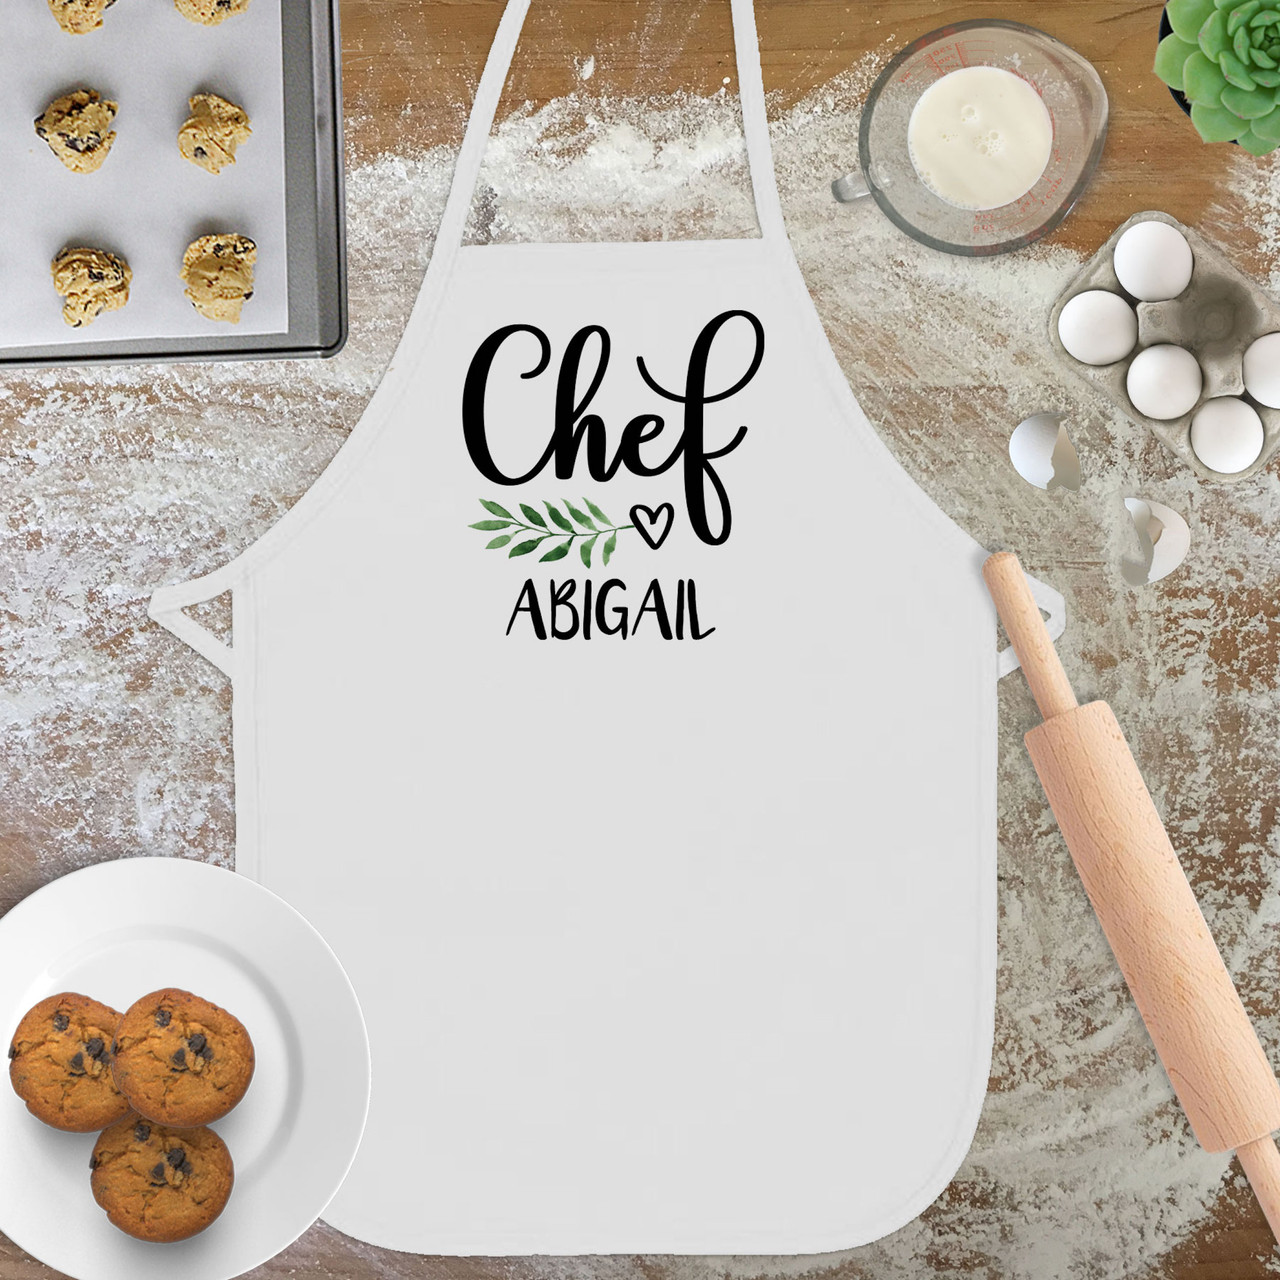 https://cdn11.bigcommerce.com/s-5grzuu6/images/stencil/1280x1280/products/4833/50566/Leaf-Heart-Personalized_Kids-Chef_Apron__65198.1666133600.jpg?c=2